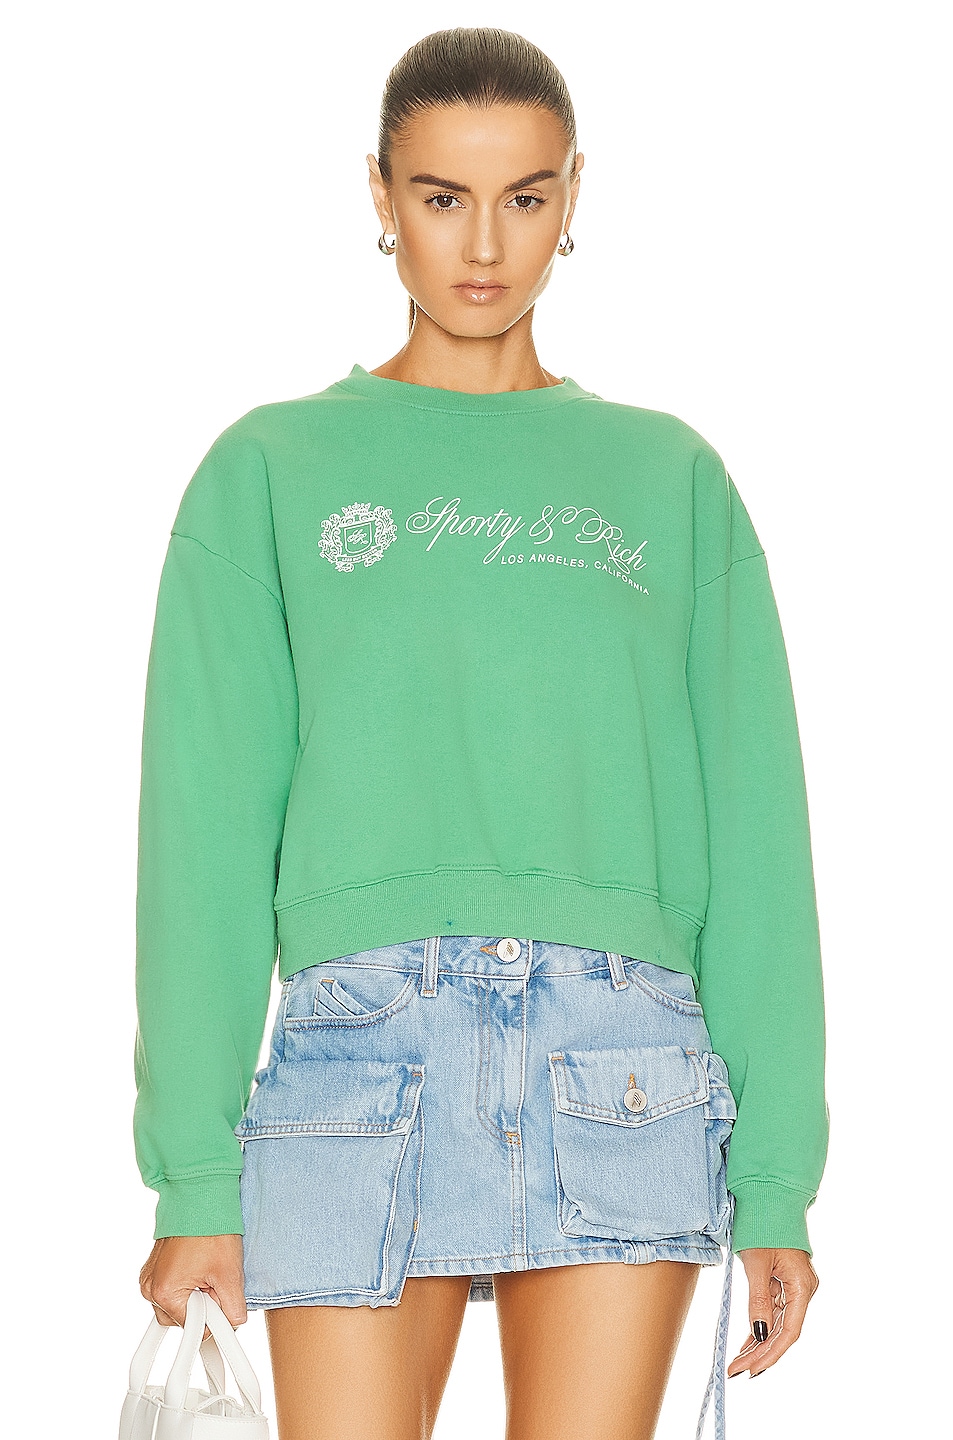 Image 1 of Sporty & Rich Regal Cropped Crewneck Sweatshirt in Green & White